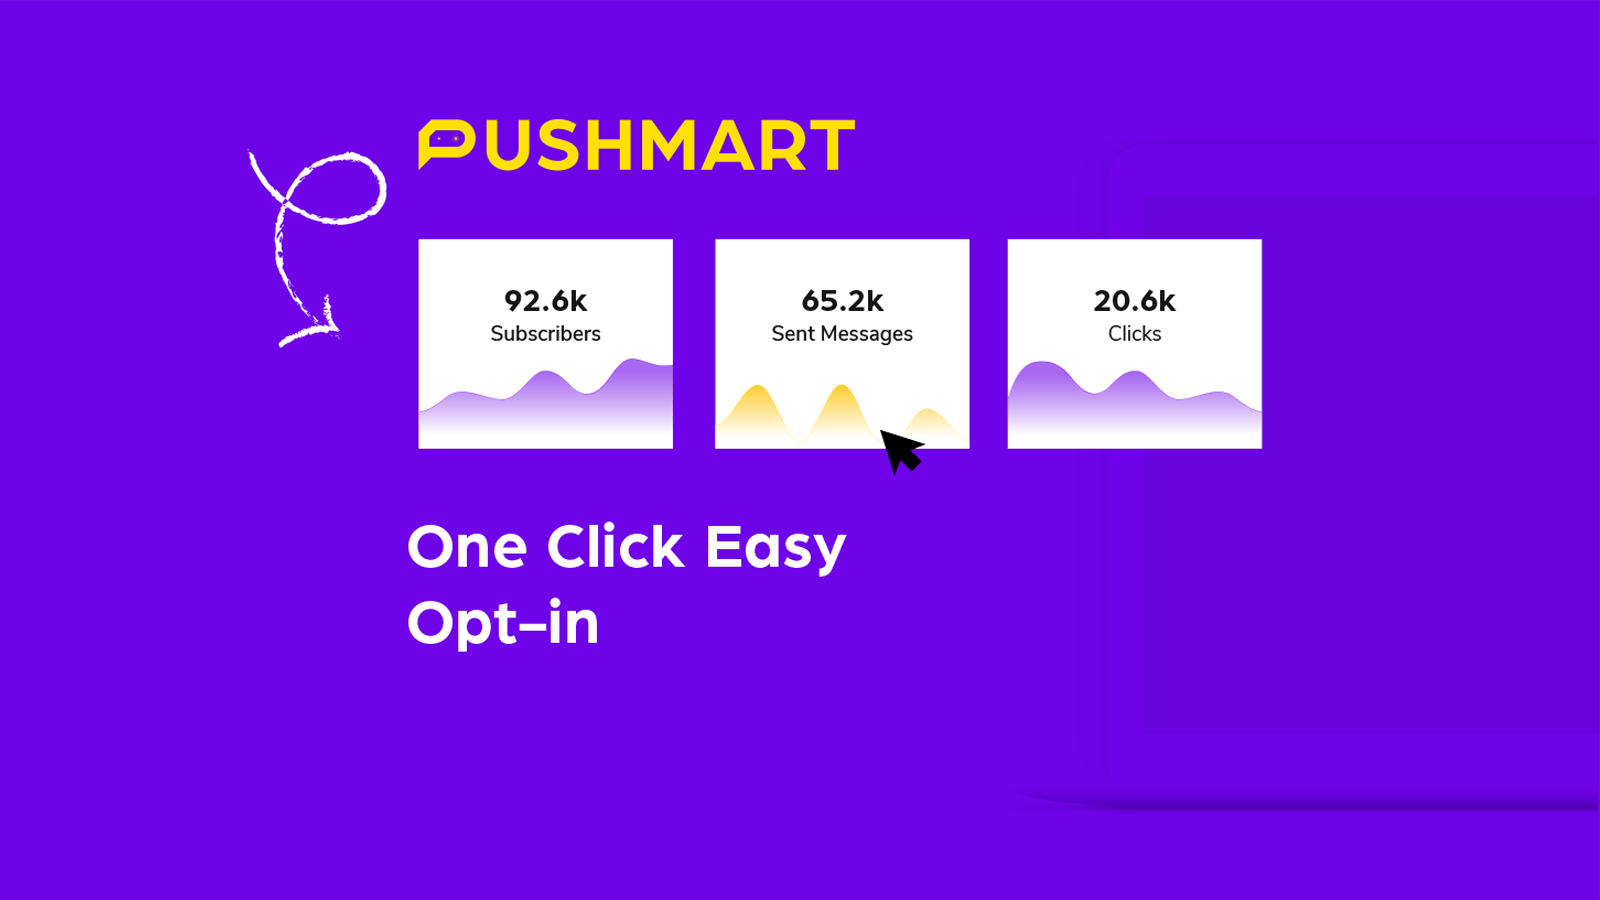 One click, easy opt-in